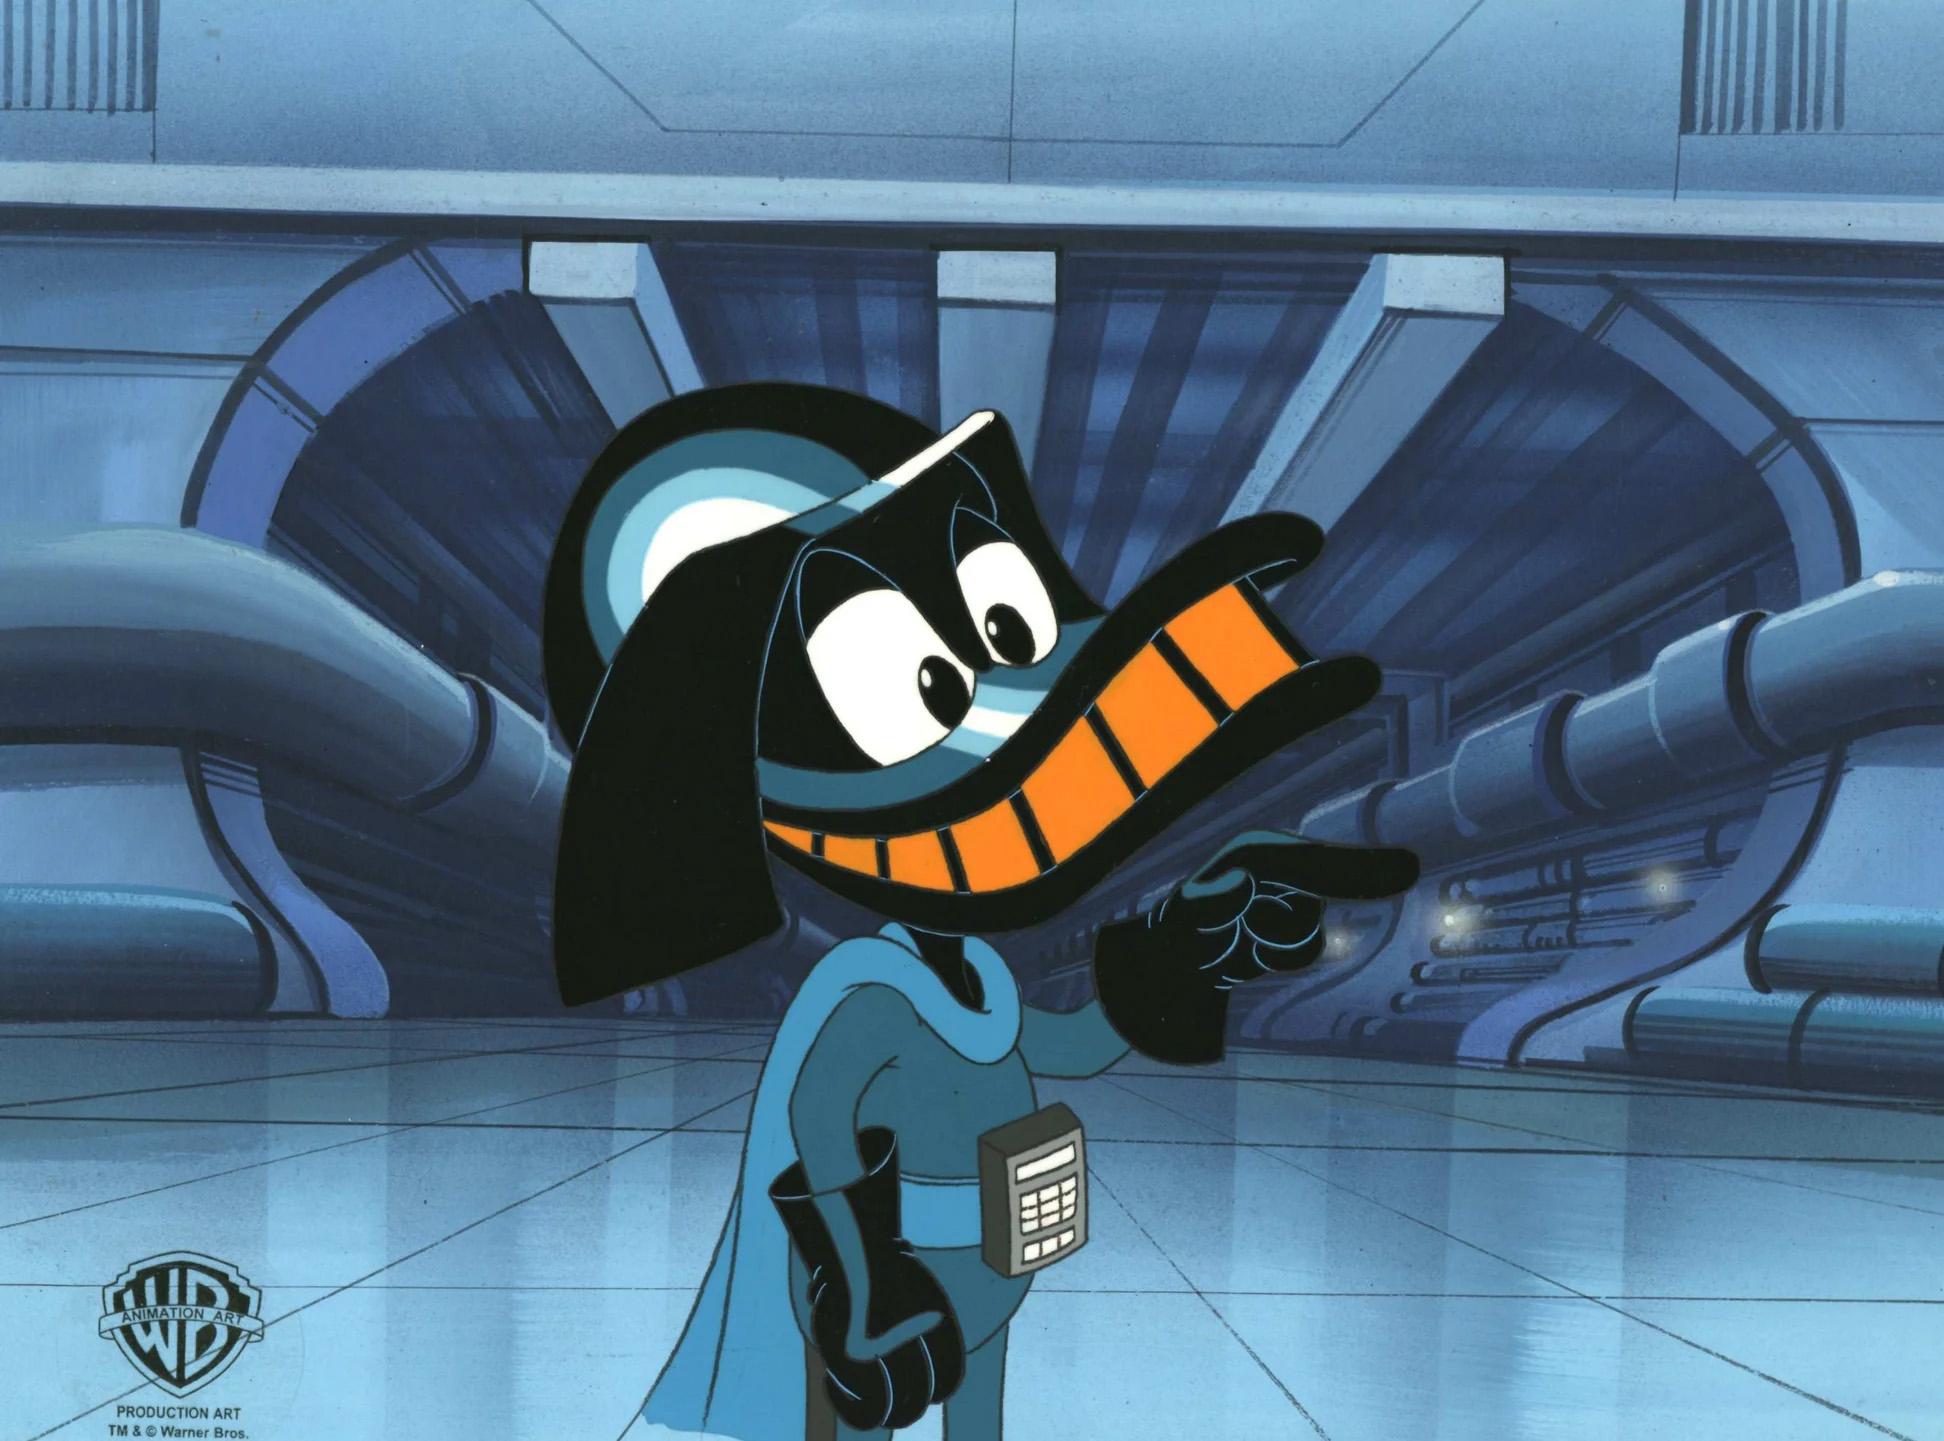 Tiny Toons Production Cel on Background with Matching Drawing: Duck Vader - Art by Warner Bros. Studio Artists